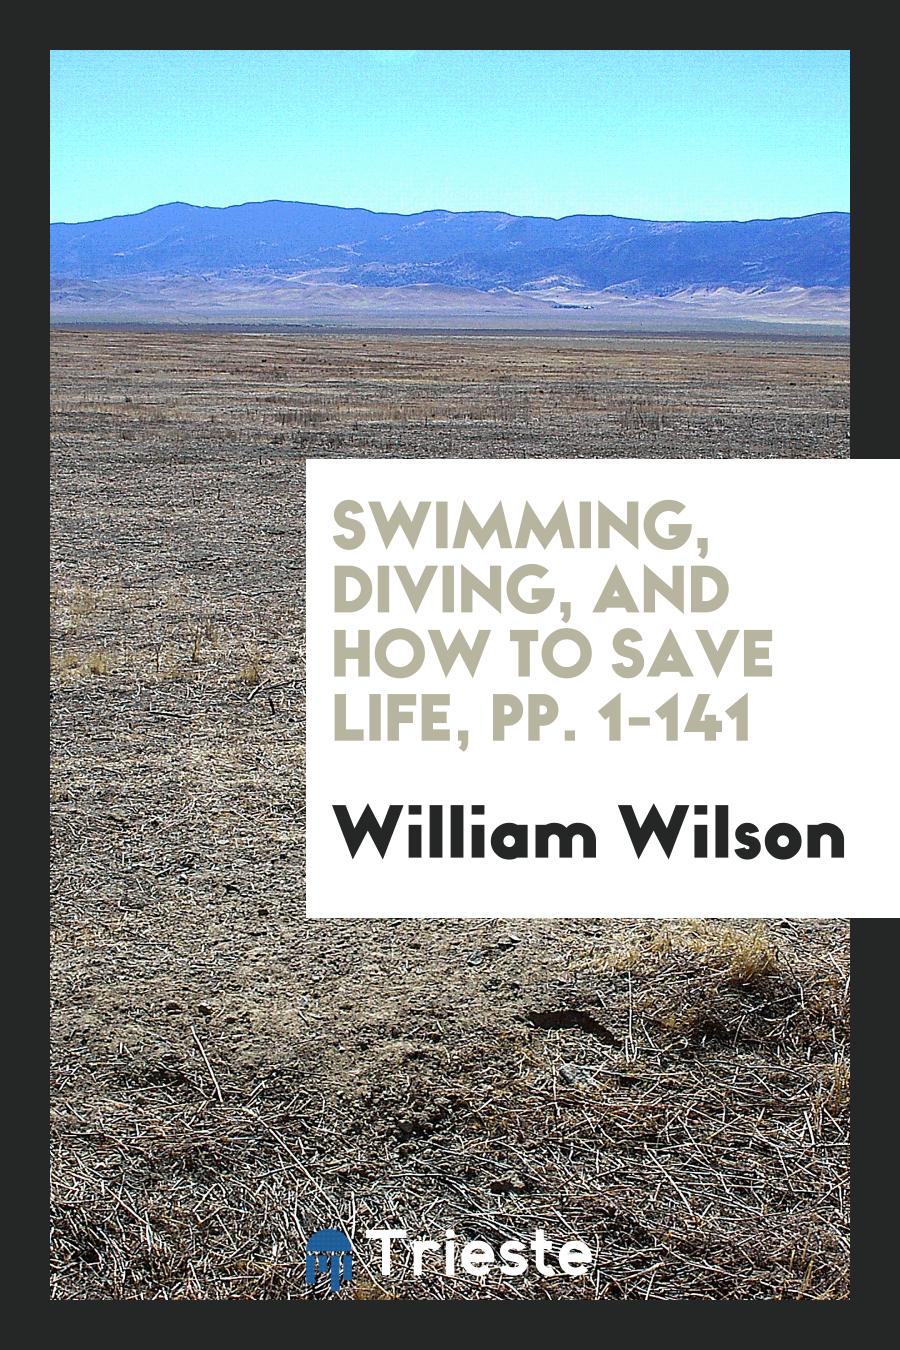 Swimming, Diving, and How to Save Life, pp. 1-141